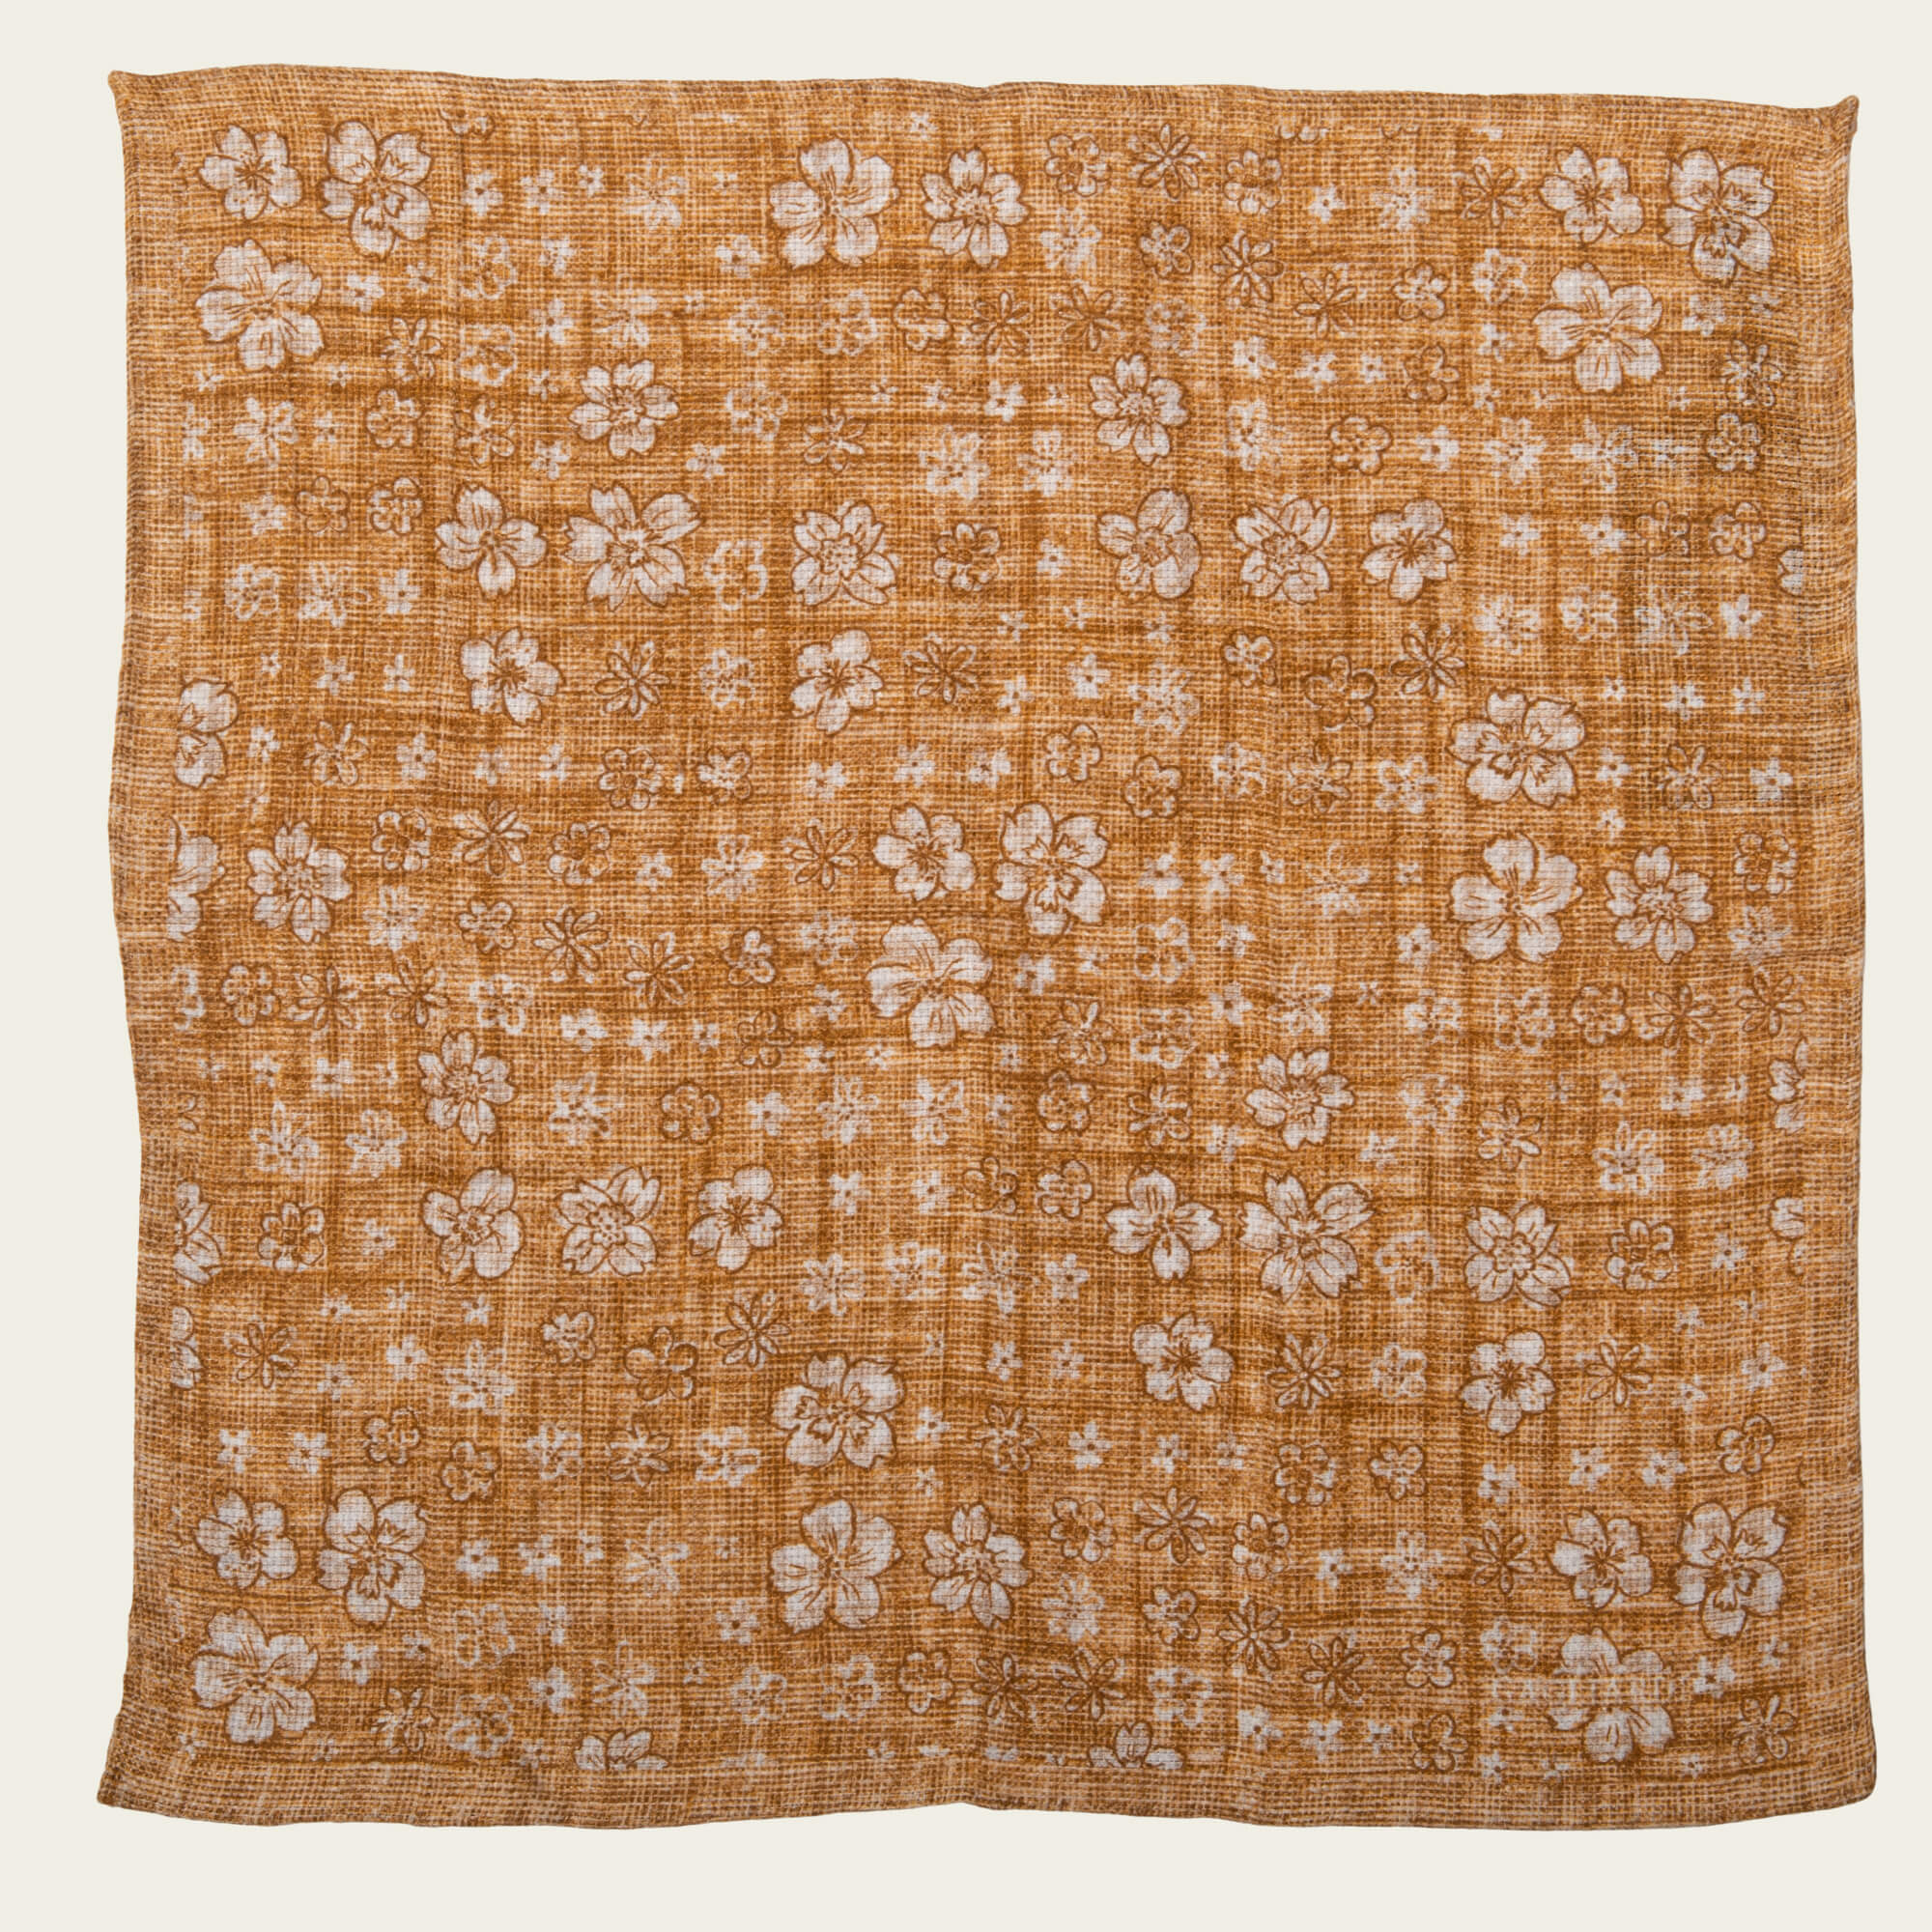 Orange With White Flower Double Sided Linen Cotton Pocket Square